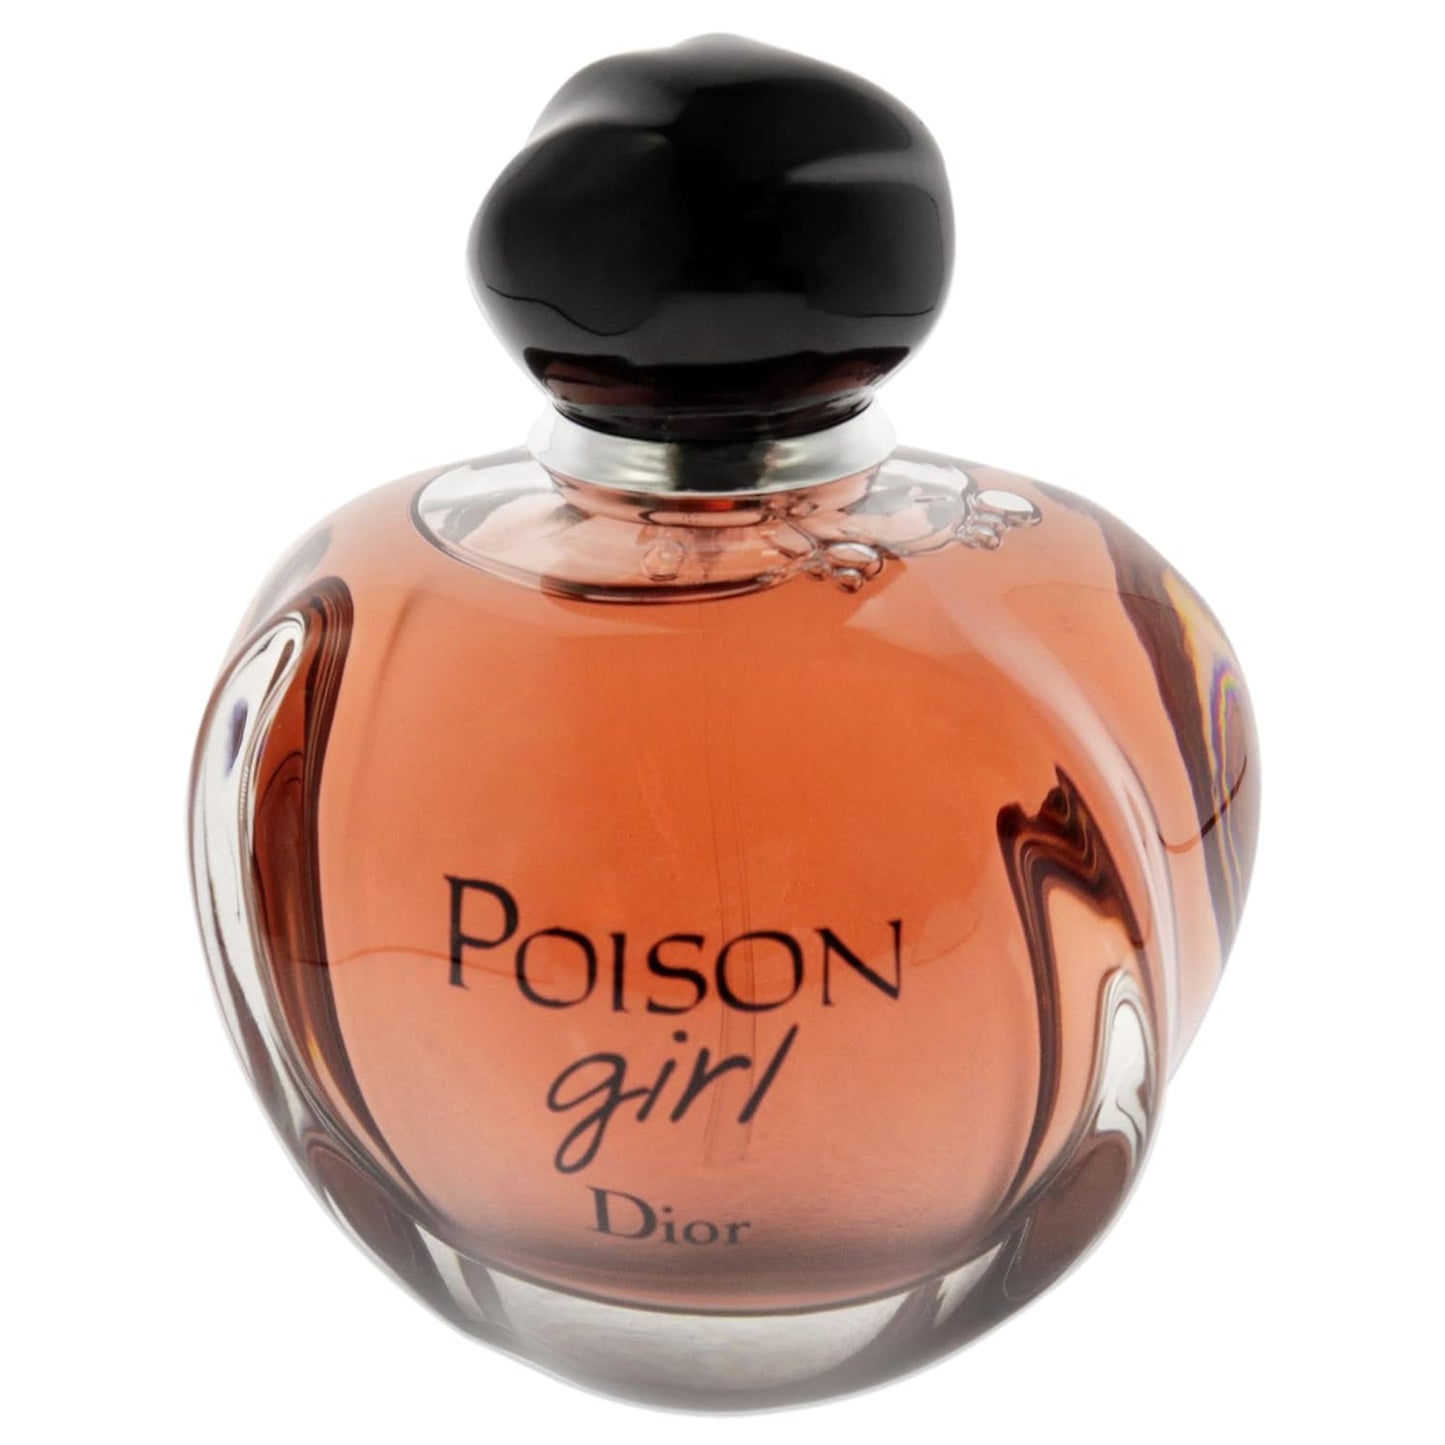 Poison "Girl" By Christian Dior